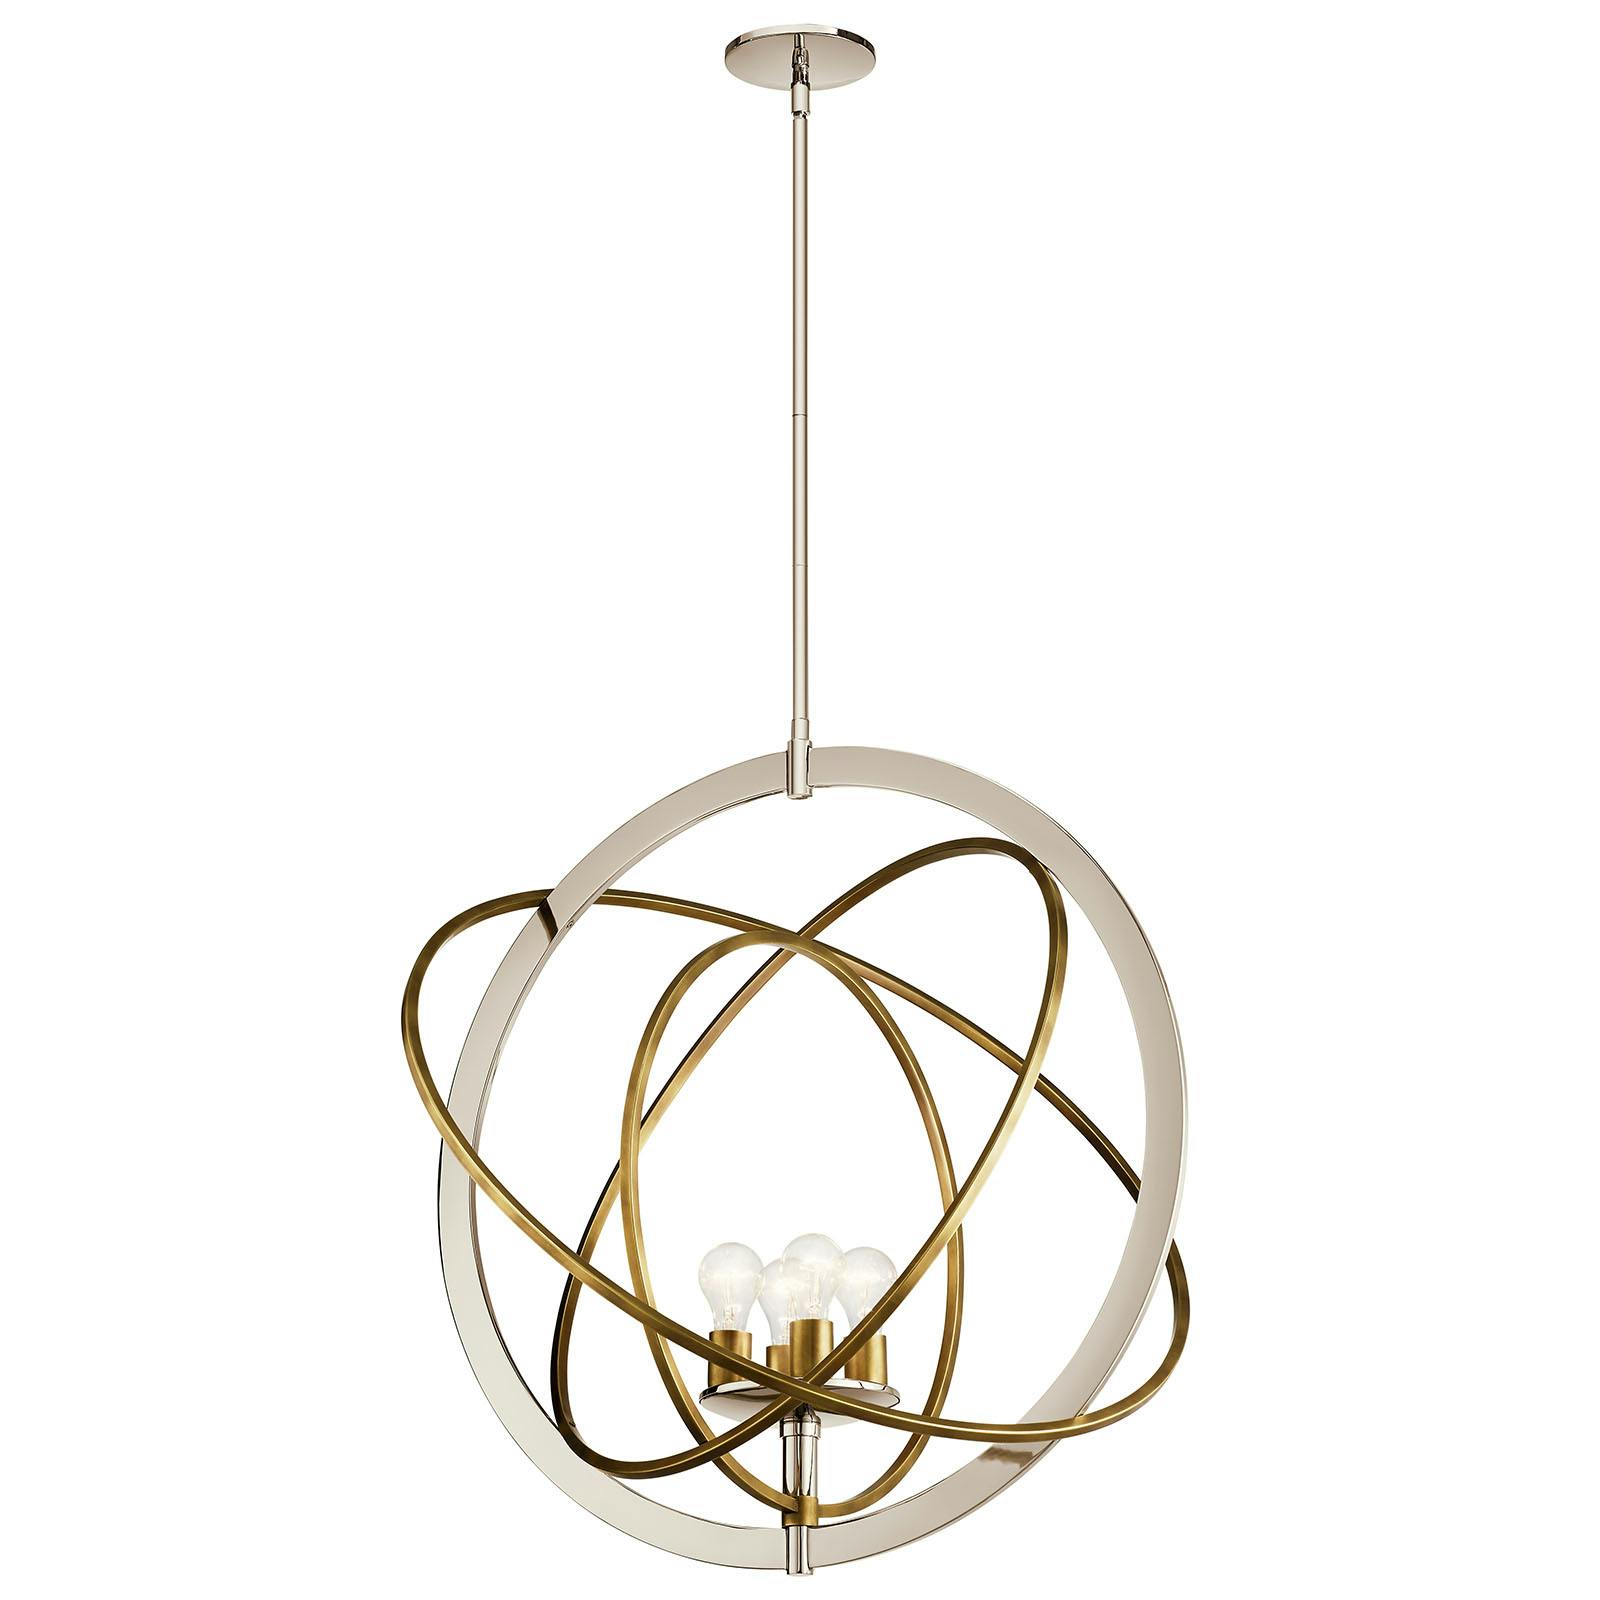 Ibis 4 Light Pendant Polished Nickel on a white background